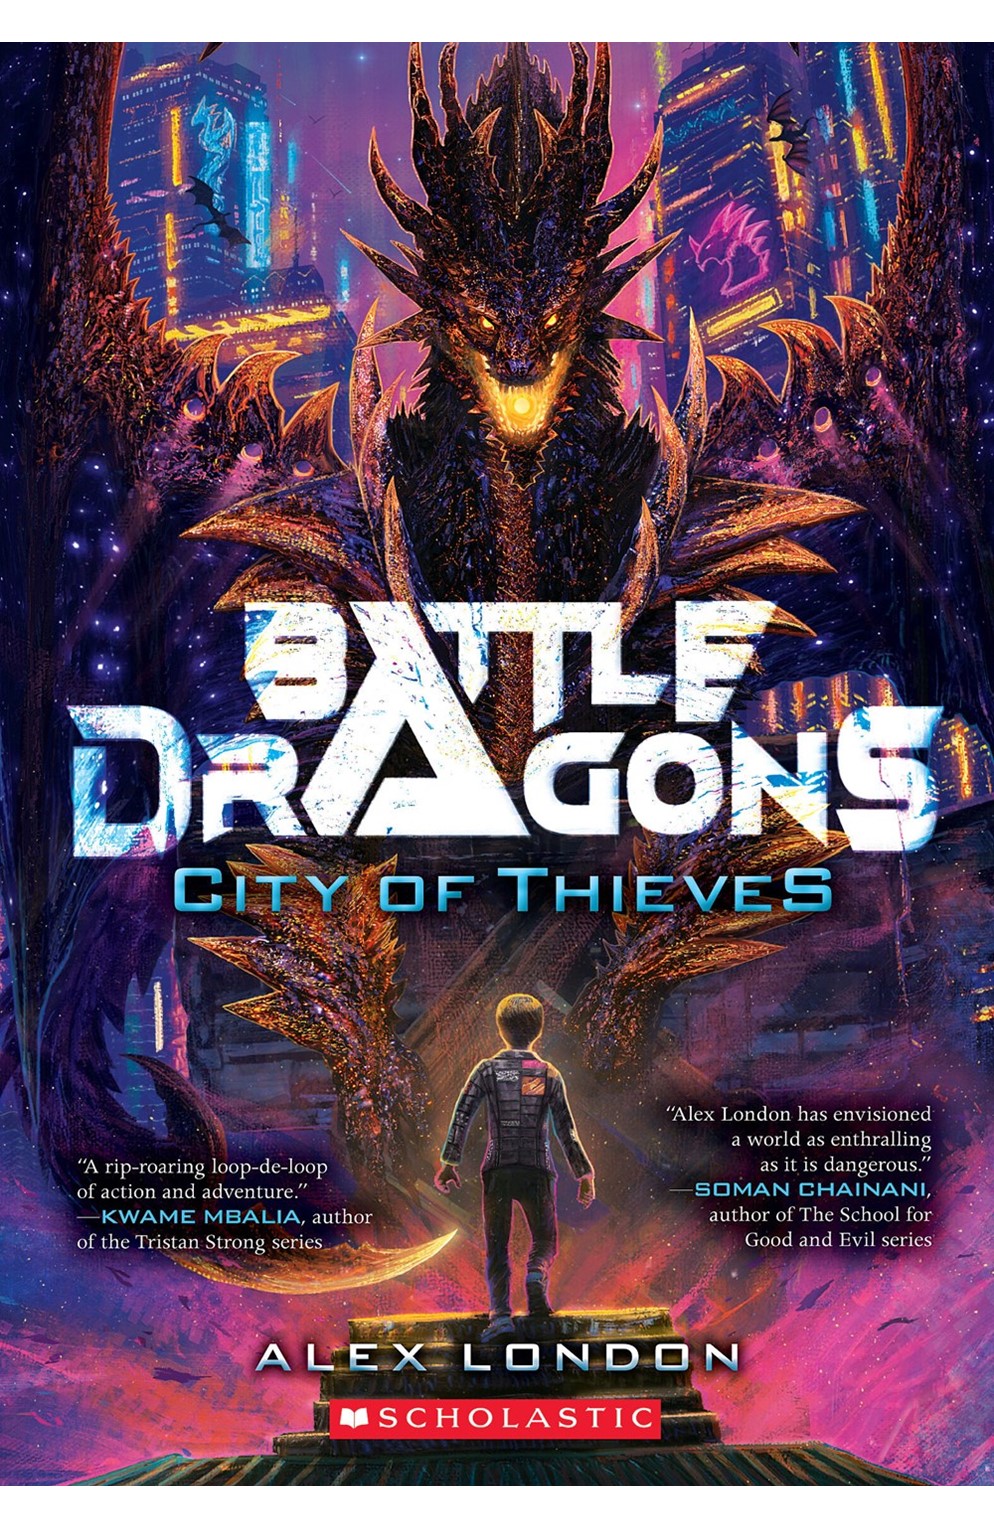 City of Thieves Book Battle Dragons Volume 1